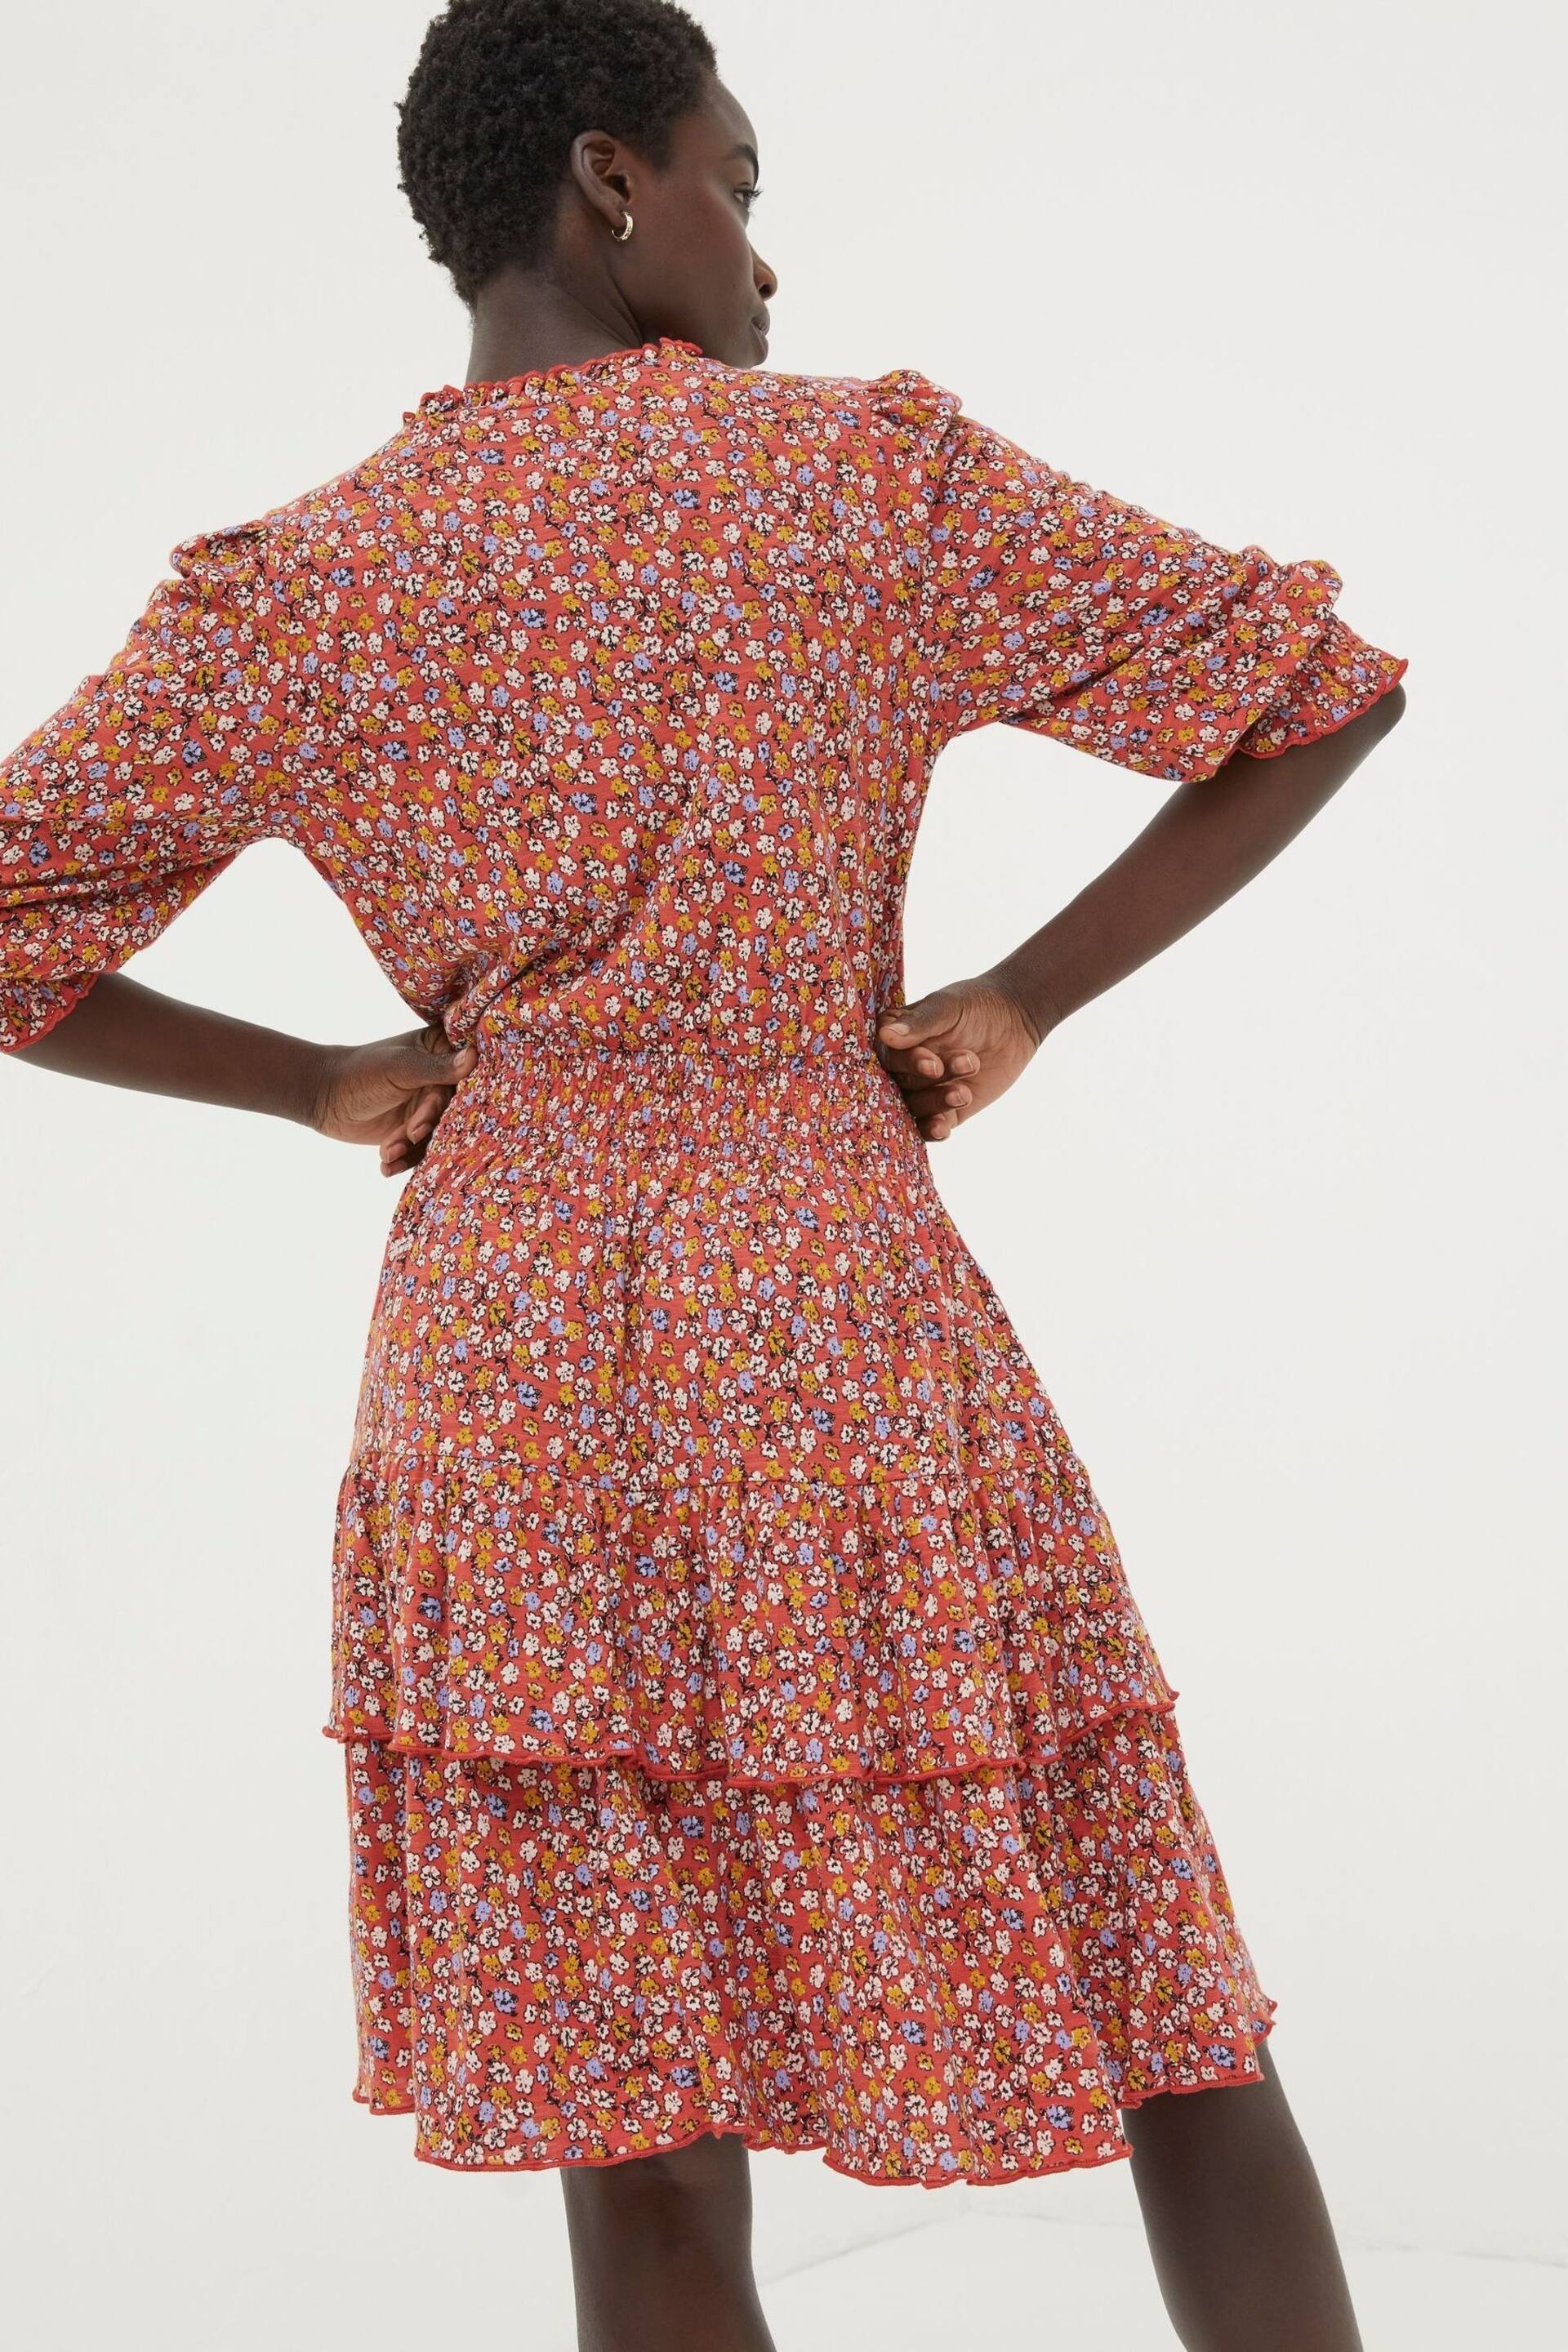 FatFace Red Amba Gradient Floral Jersey Dress - Image 2 of 5